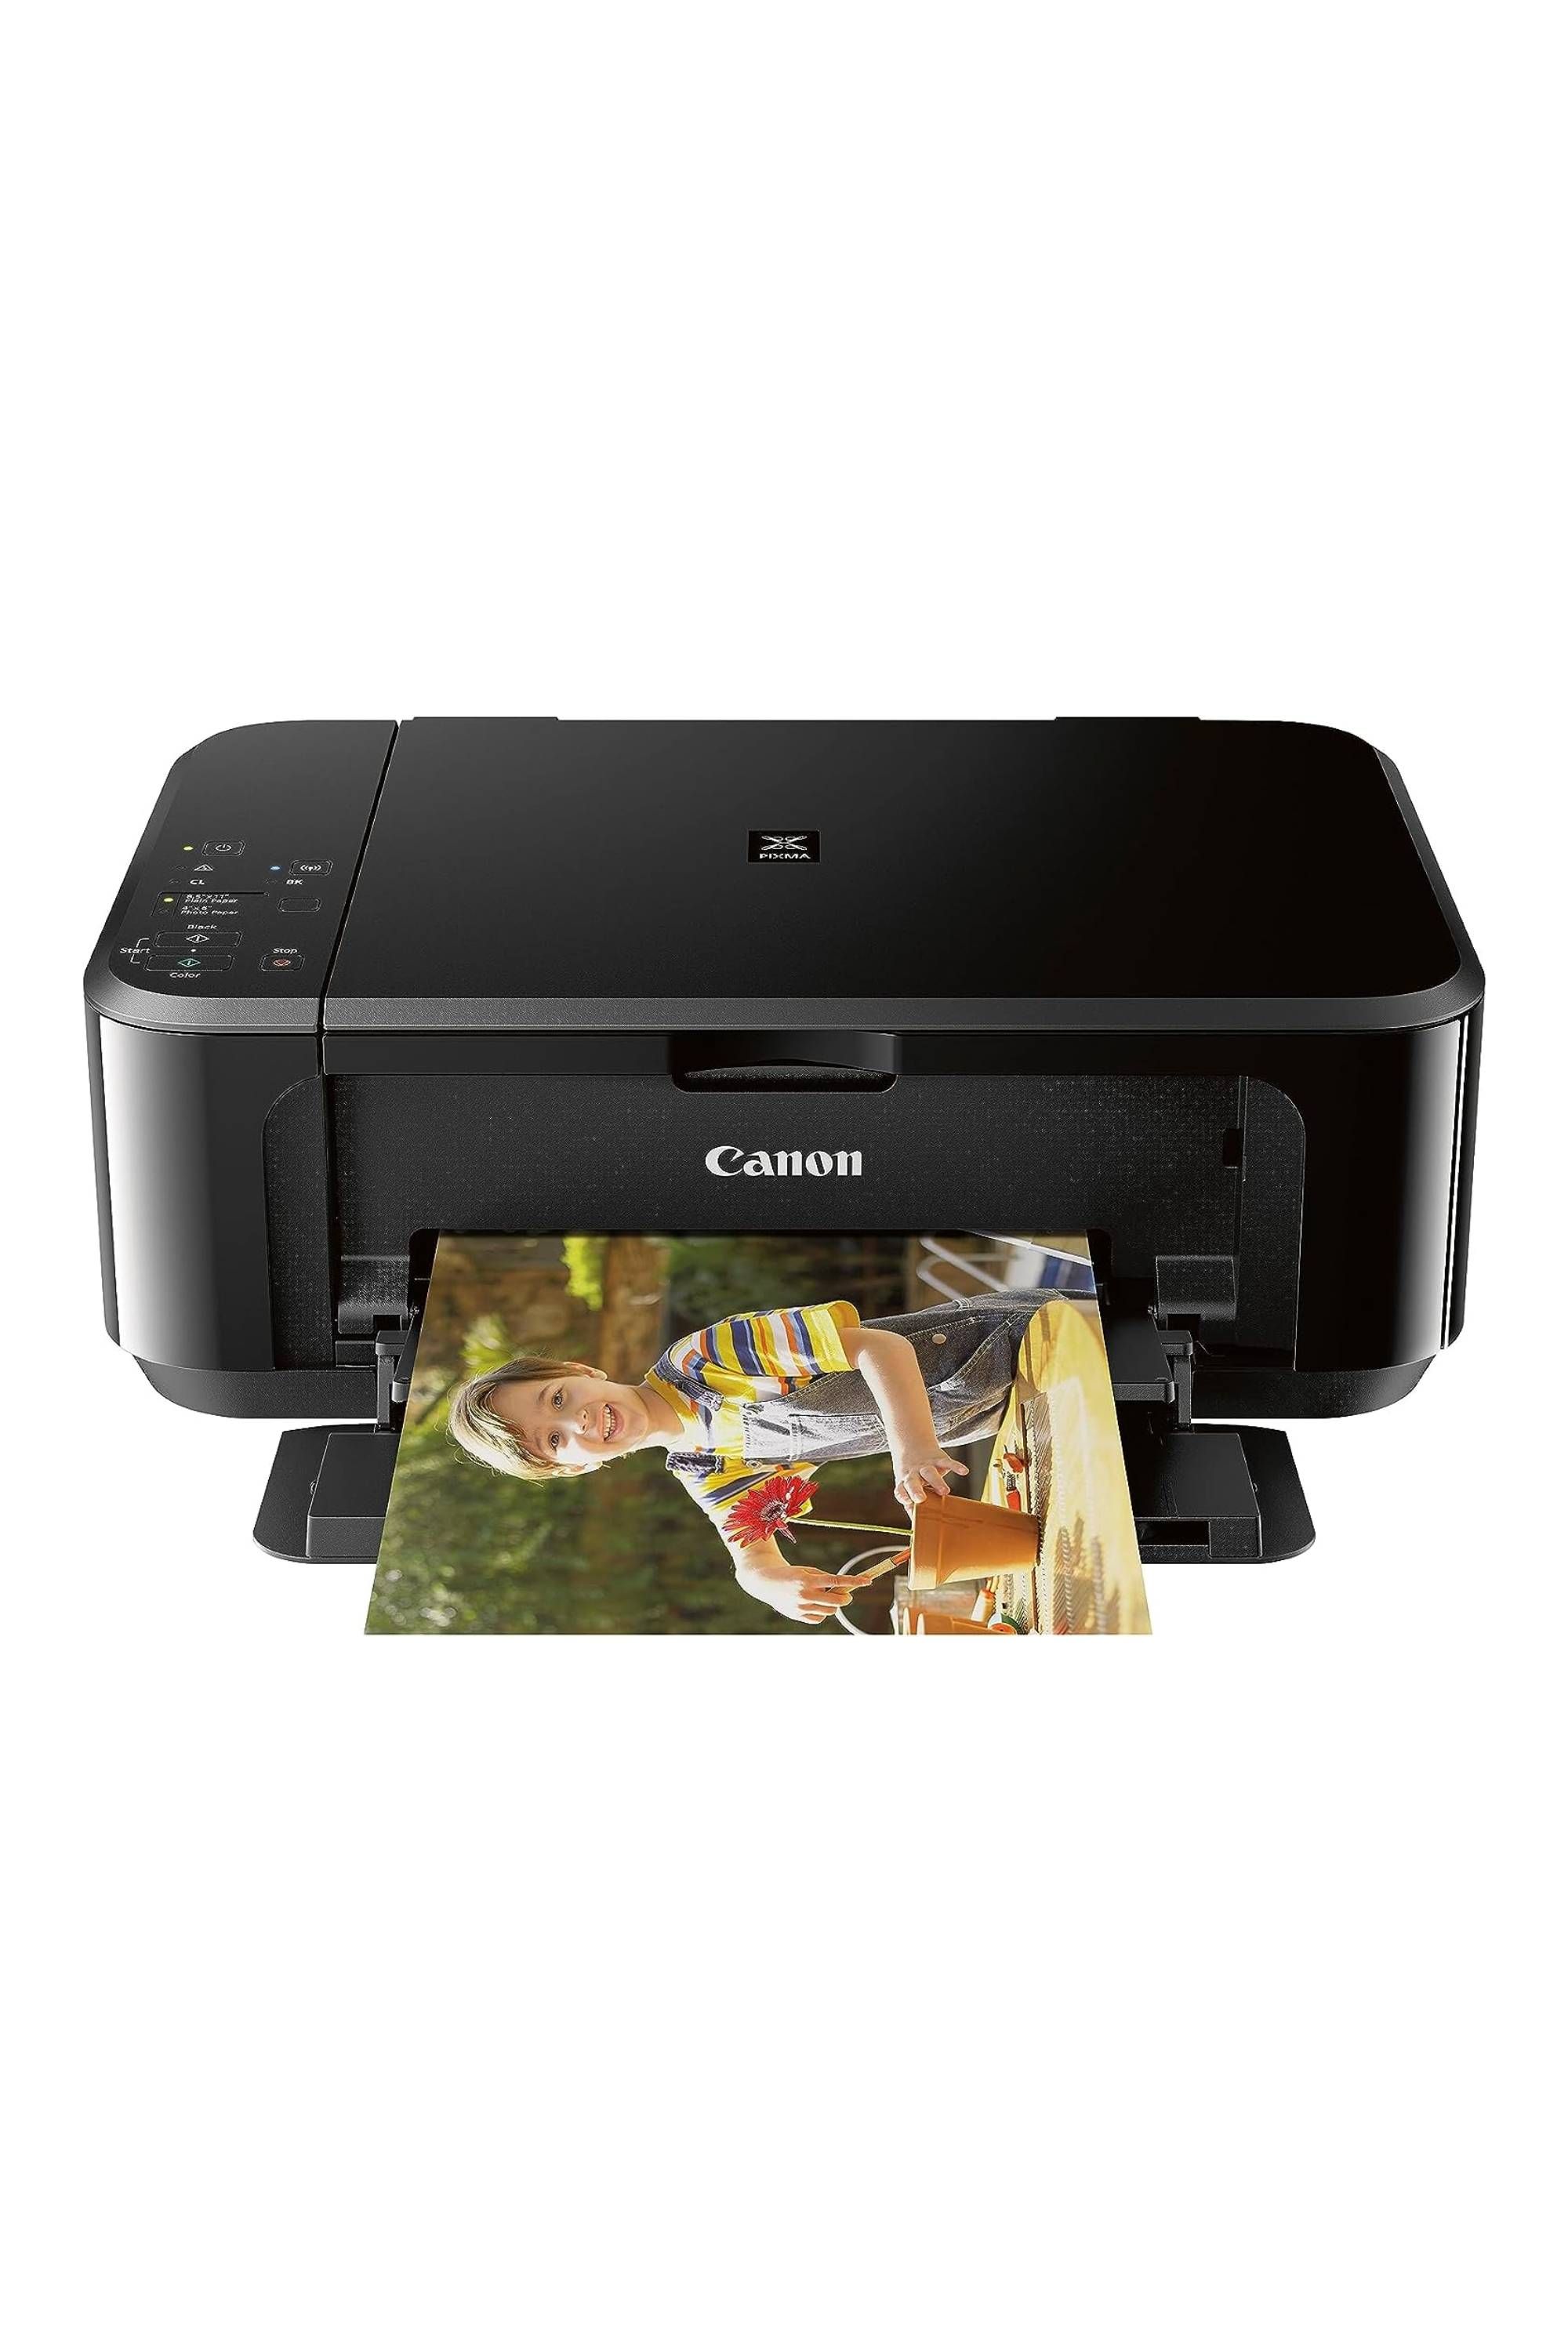 Best printer deals: 10+ cheap printers on sale as low as $40